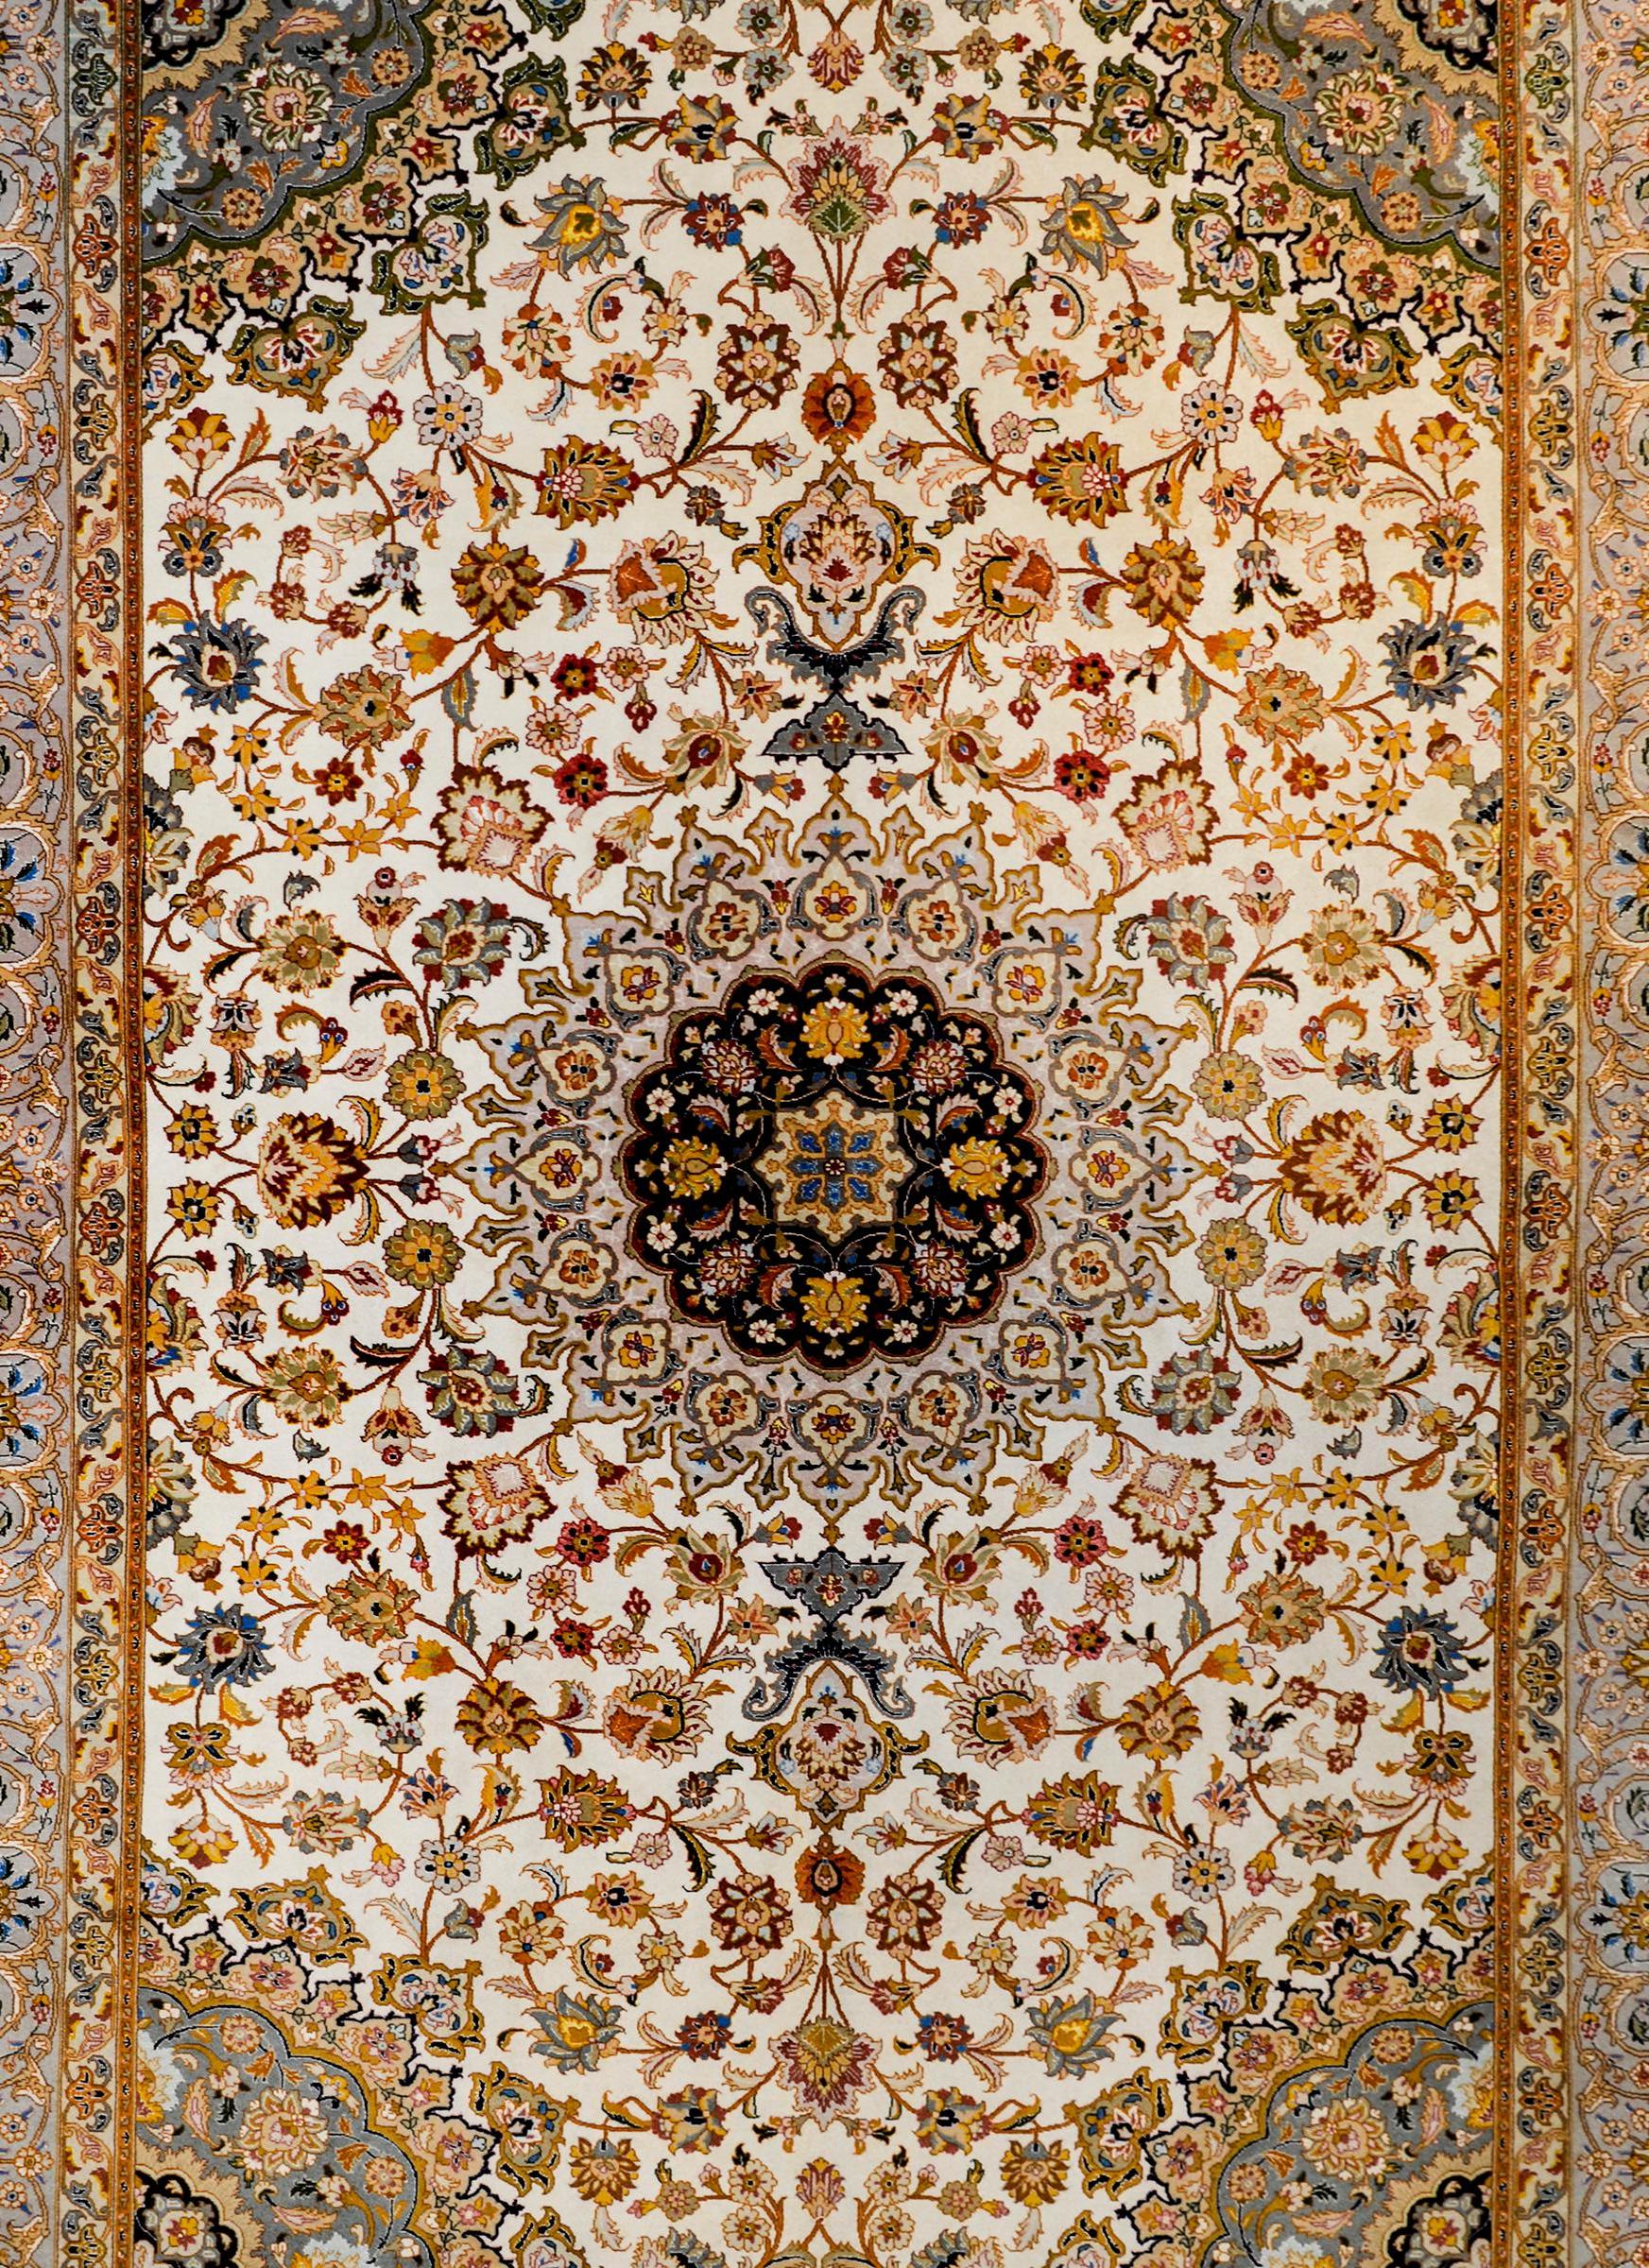 An extraordinary vintage Persian silk and wool Tabriz rug with a skillfully and precisely rendered large-scale floral and vine pattern. The flowers are woven in crimson, orange, gold, indigo, green, and white vegetable dyed silk and wool, on a white